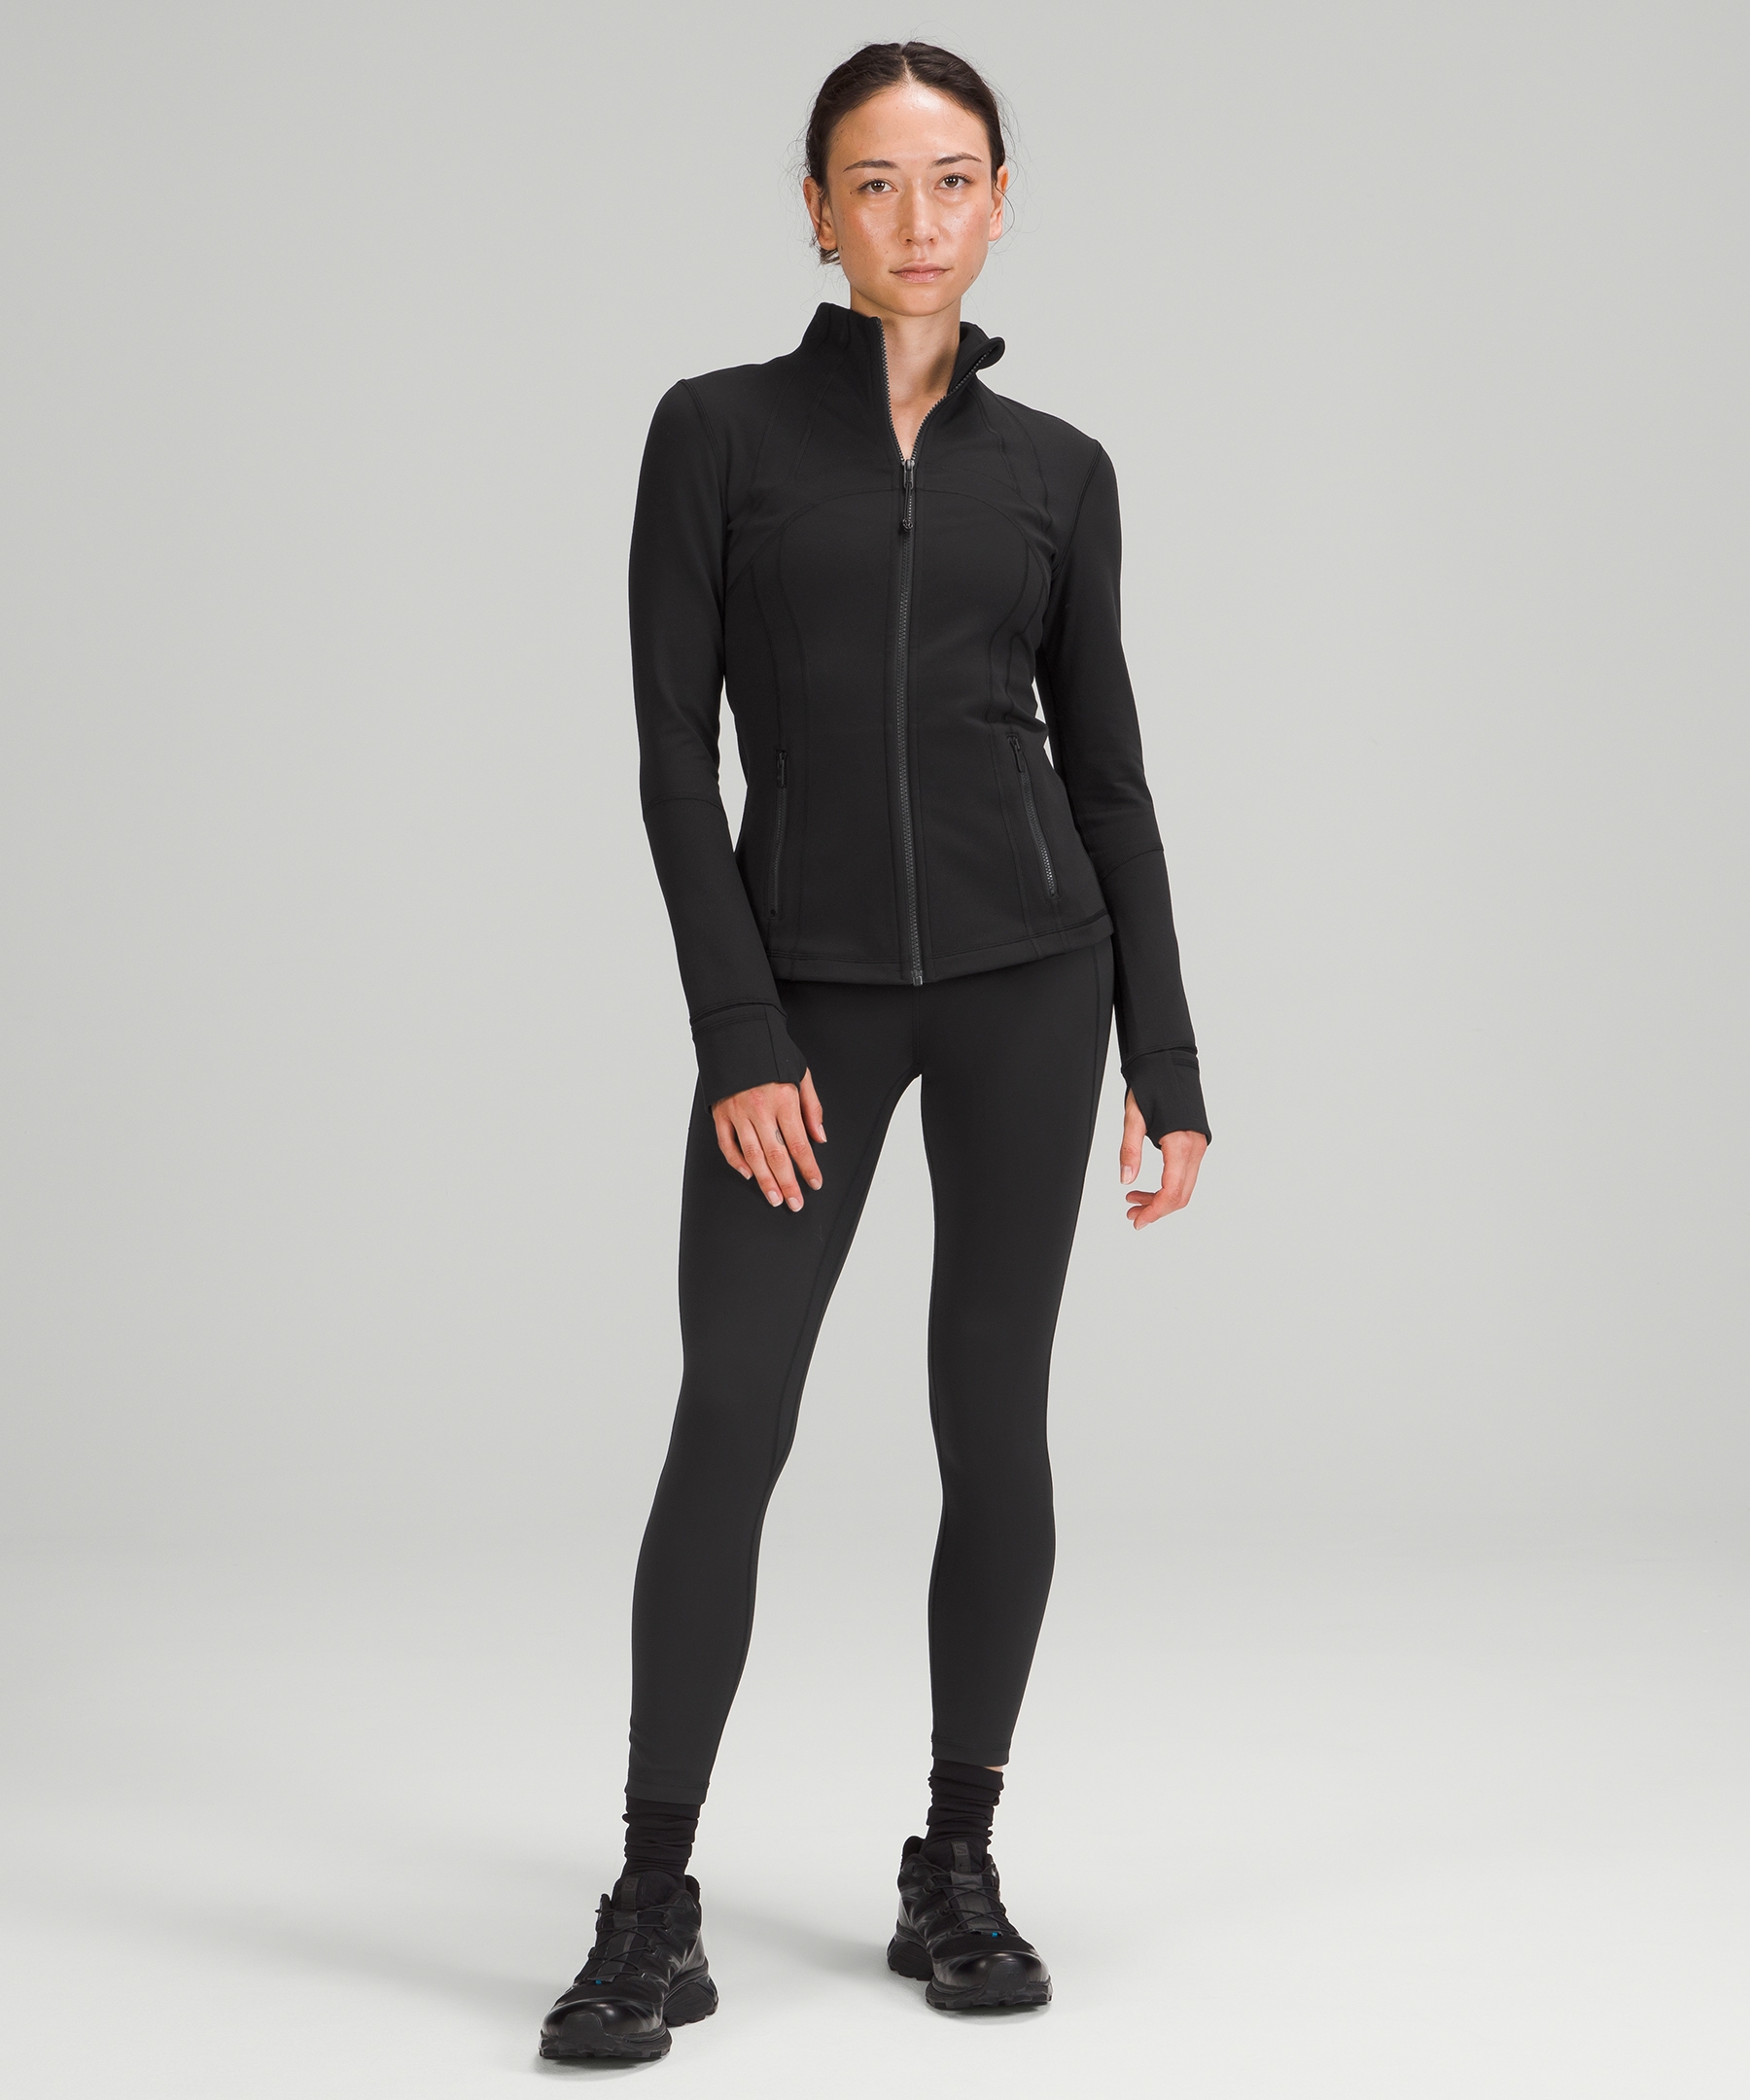 Why Lululemon shoppers call the Cross Chill Jacket 'absolutely